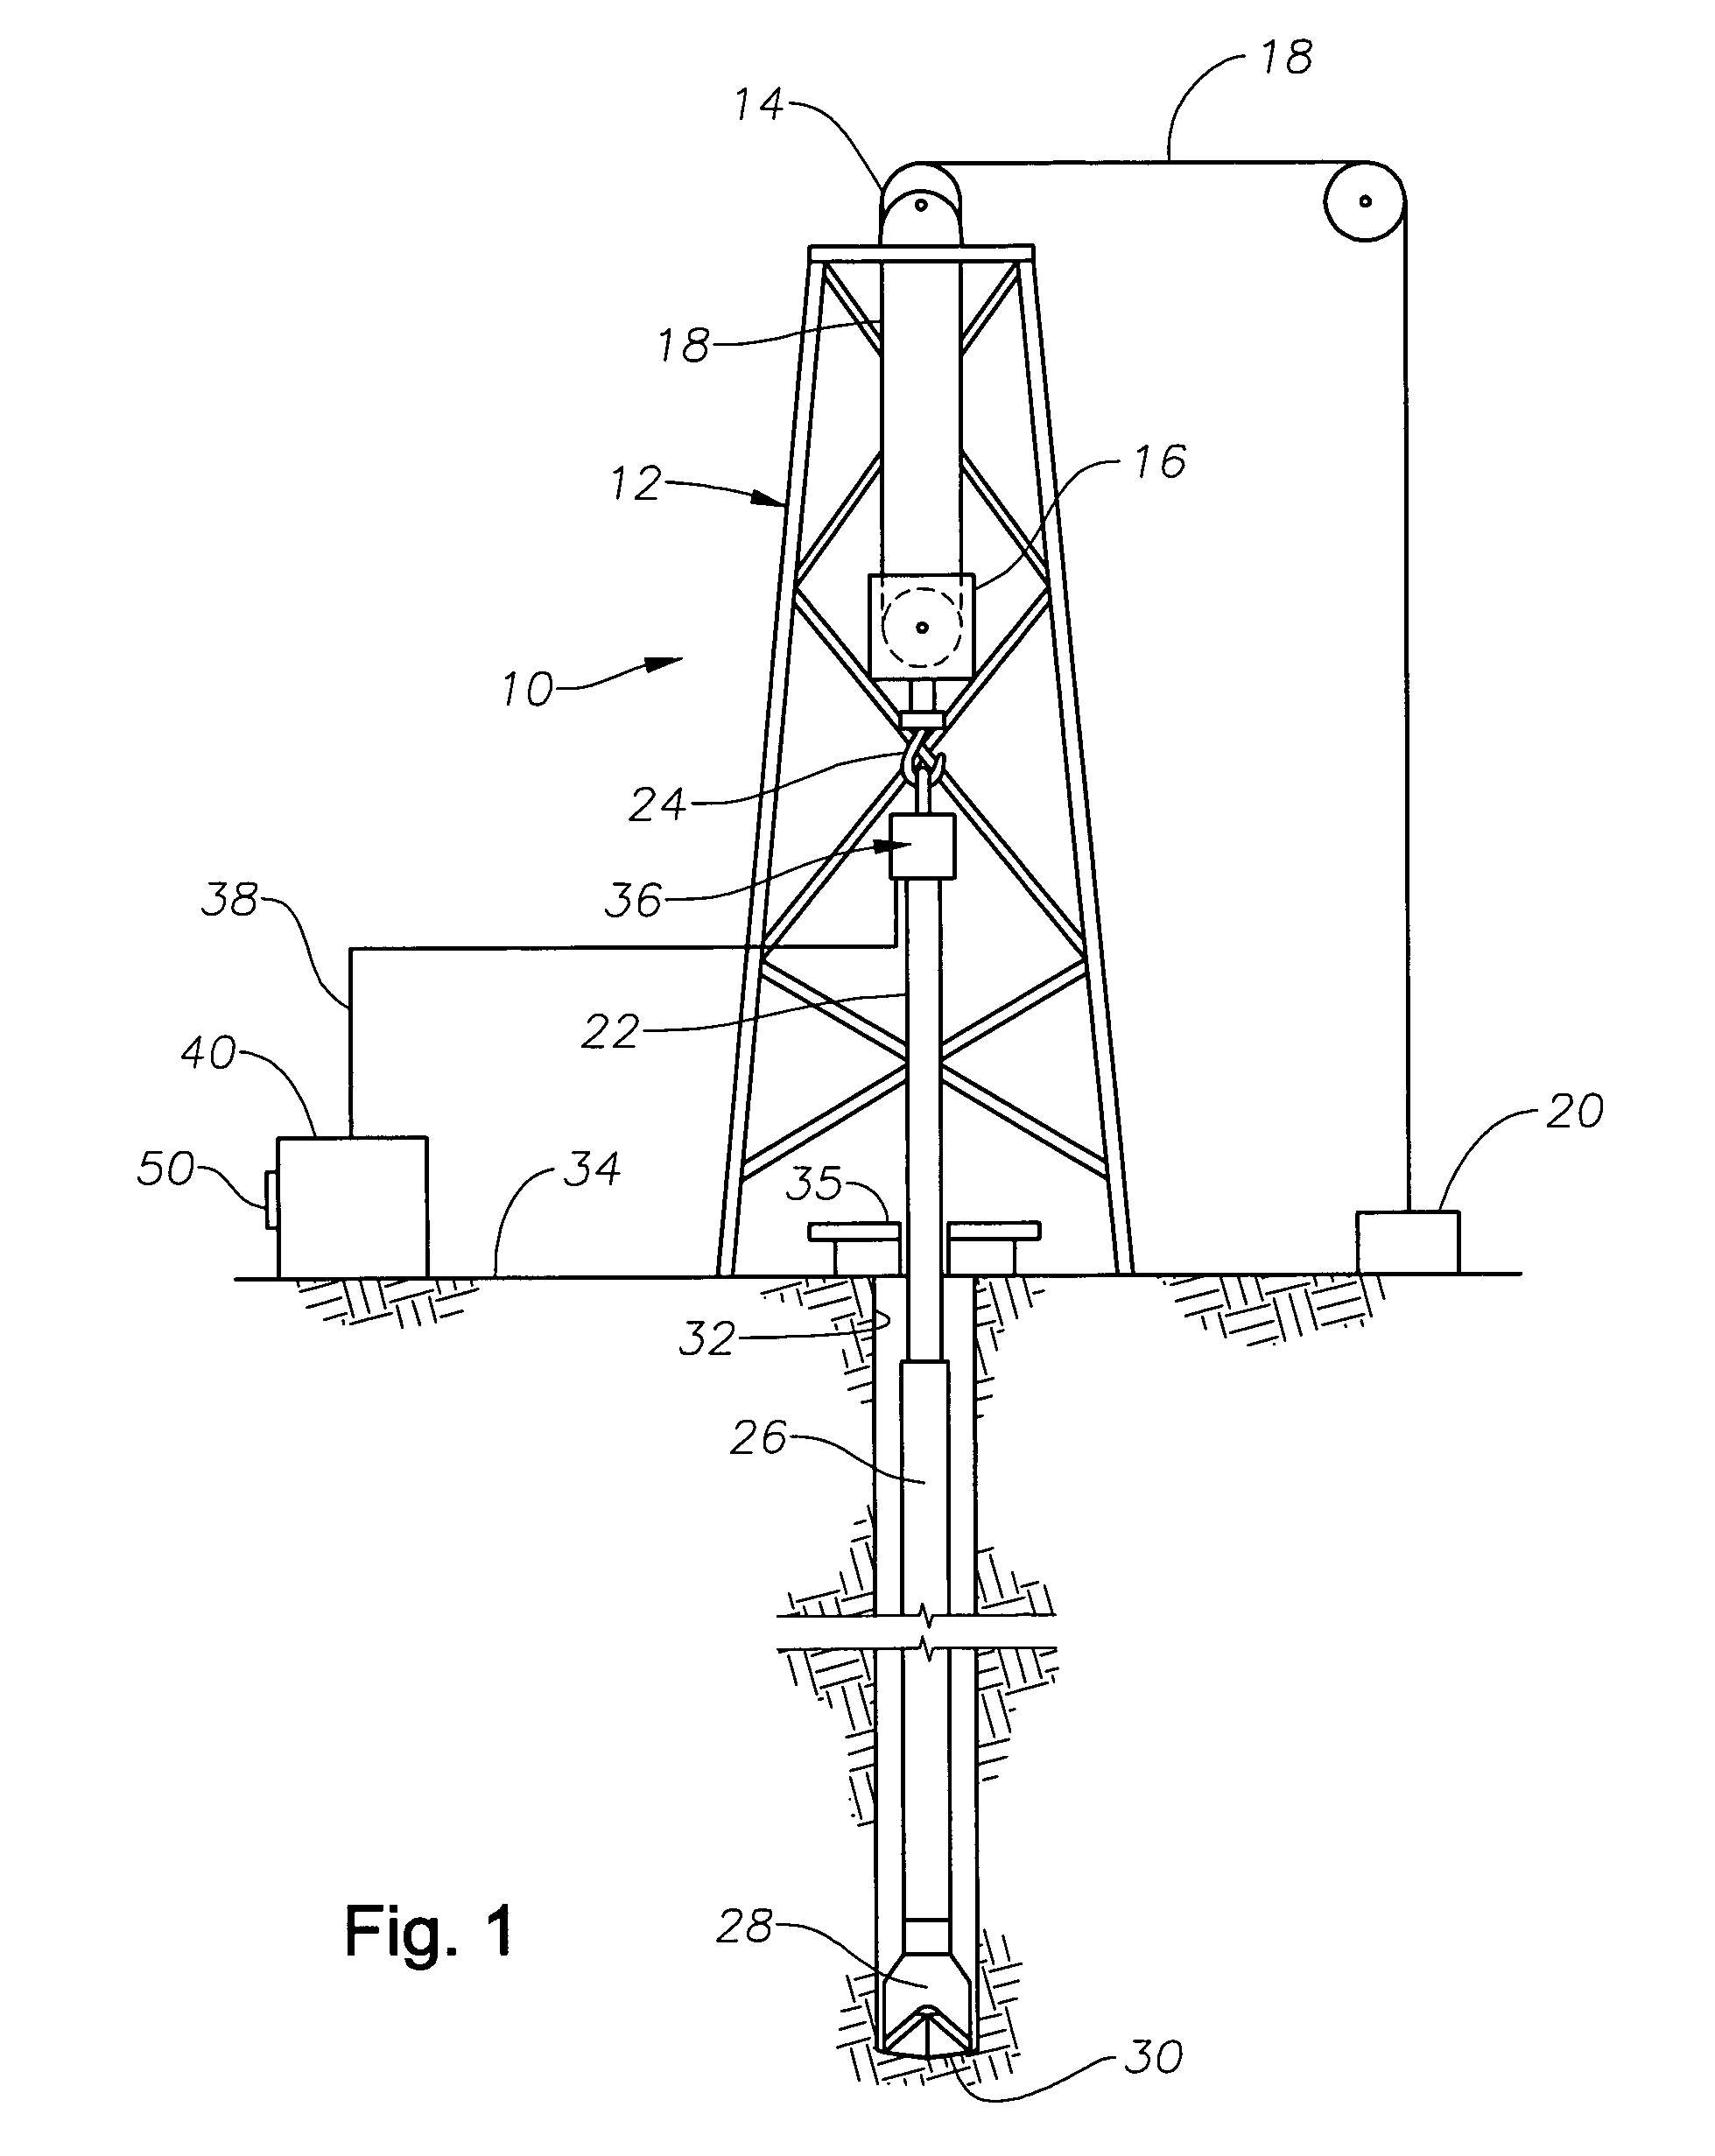 Autodriller bit protection system and method